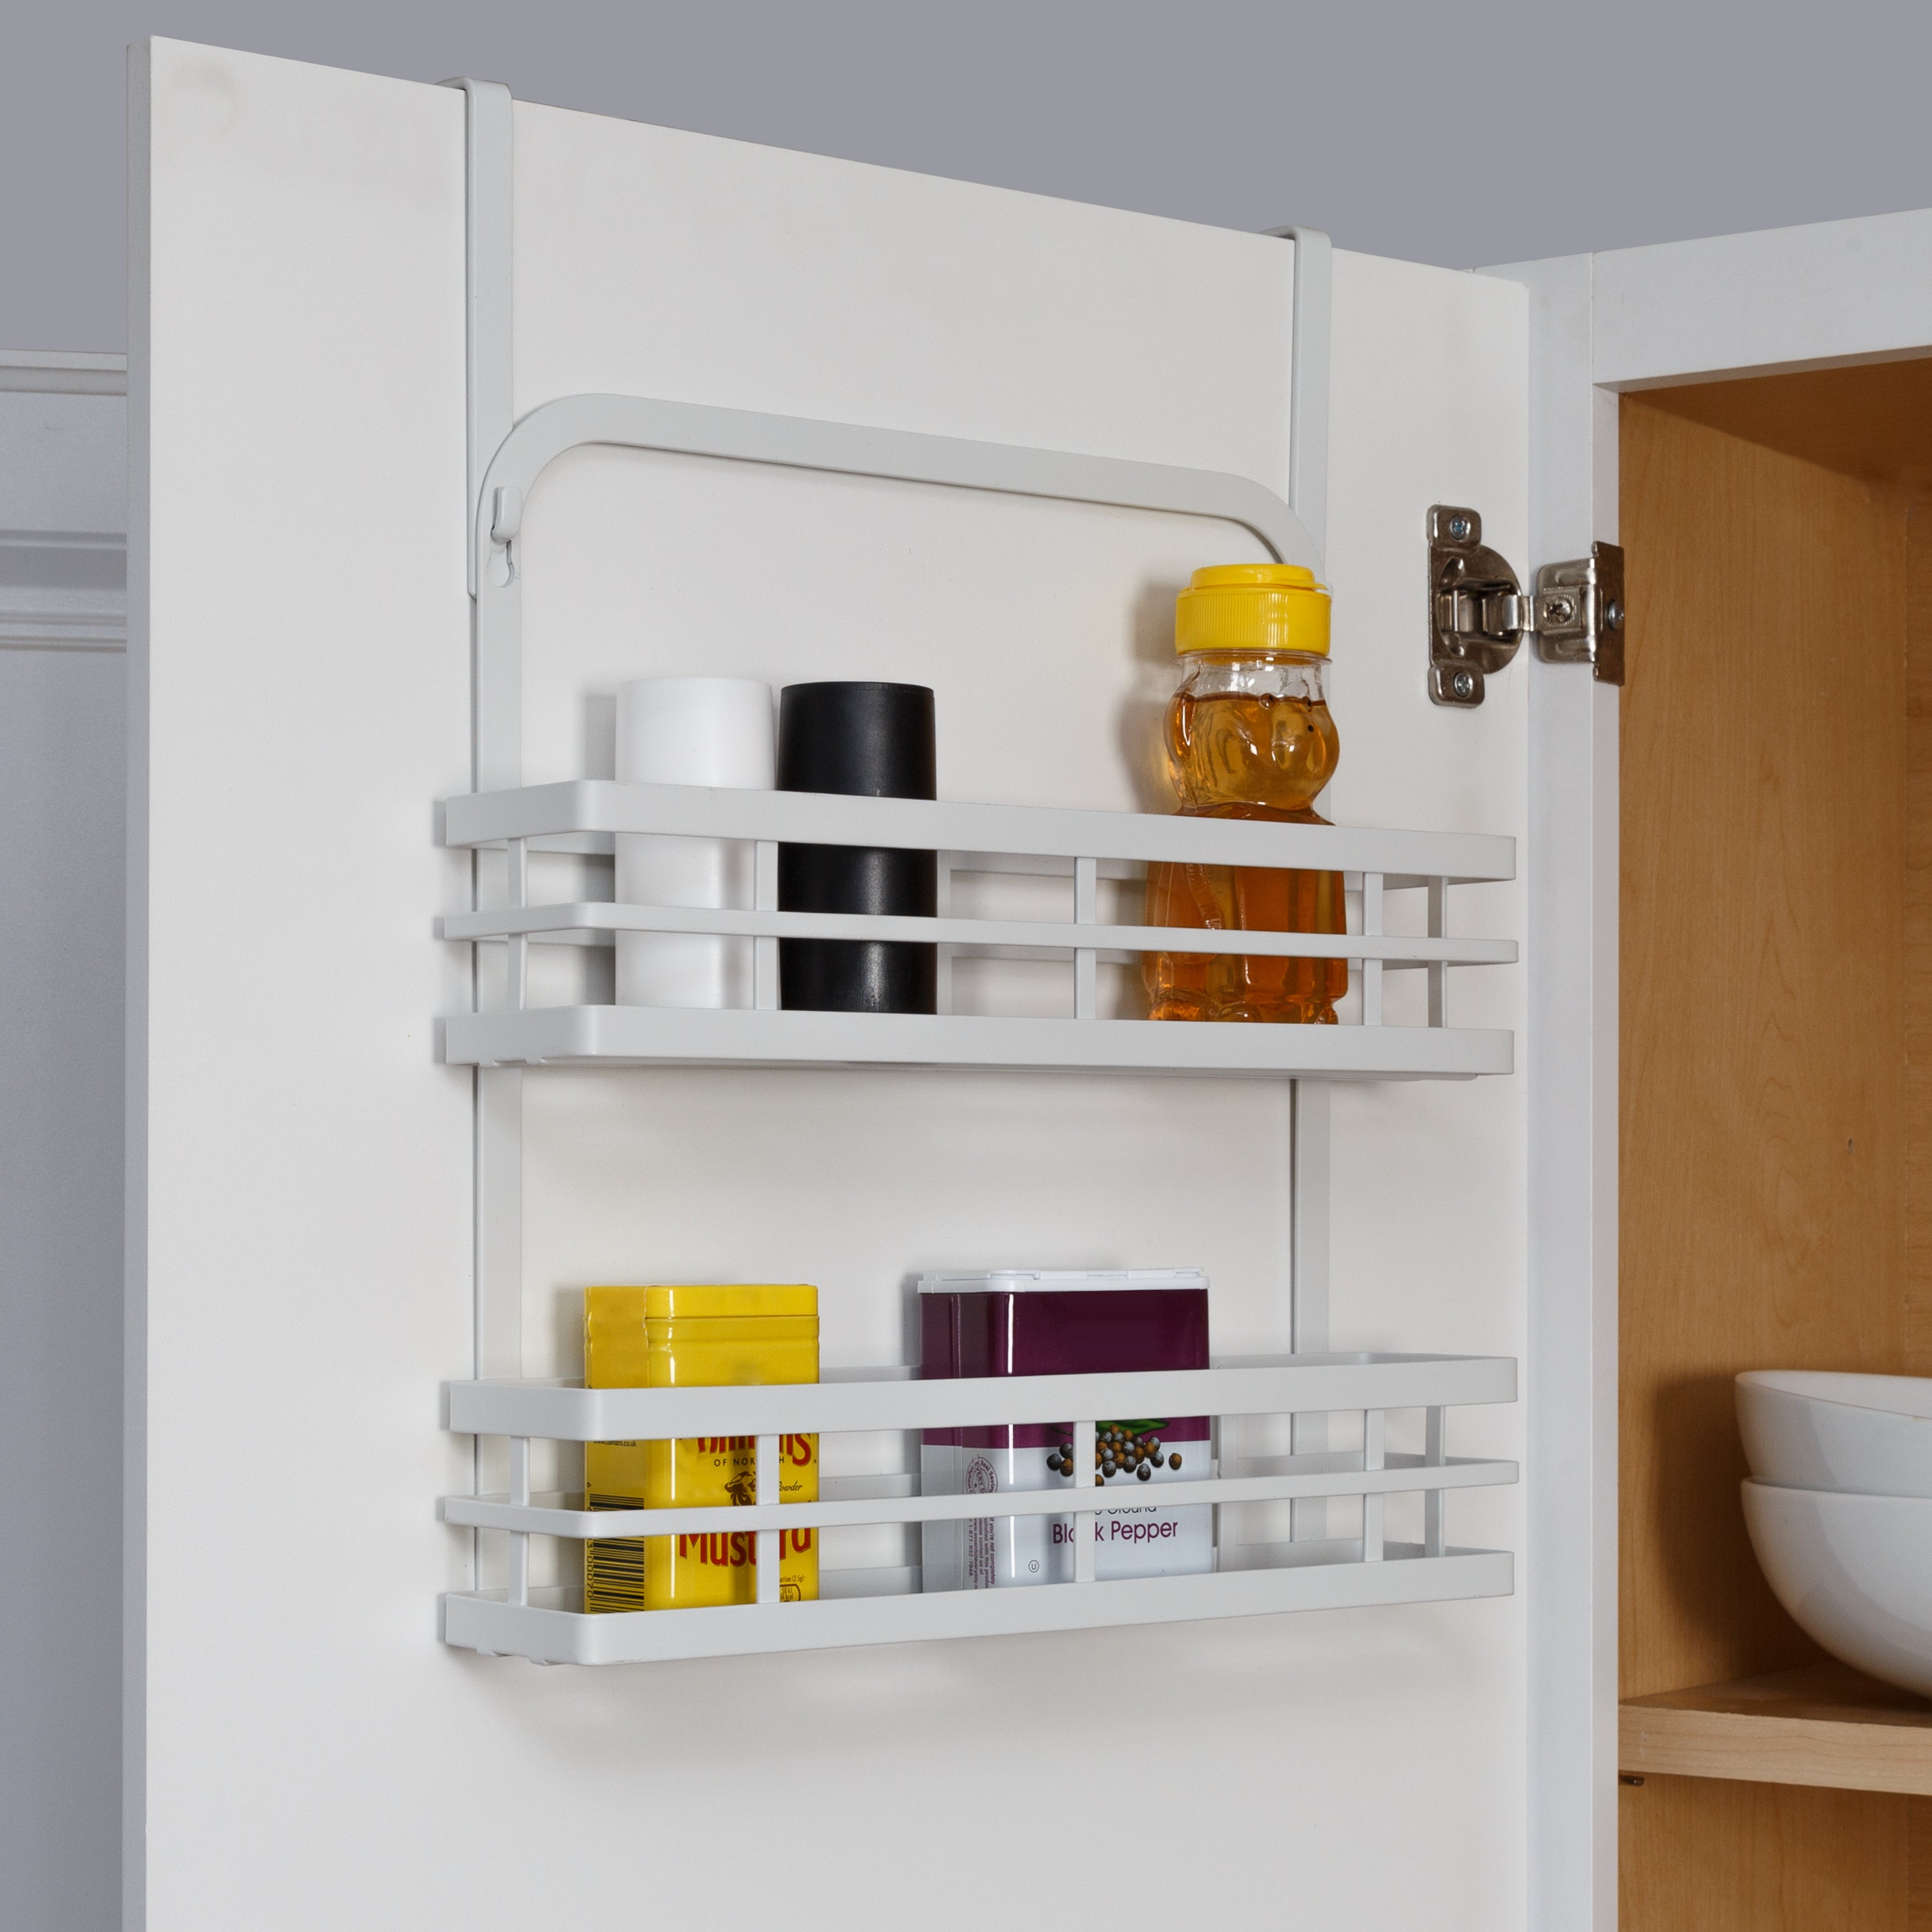 Cabinet Caddy SNAP! Sliding Spice Rack Organizer for Cabinet, Just